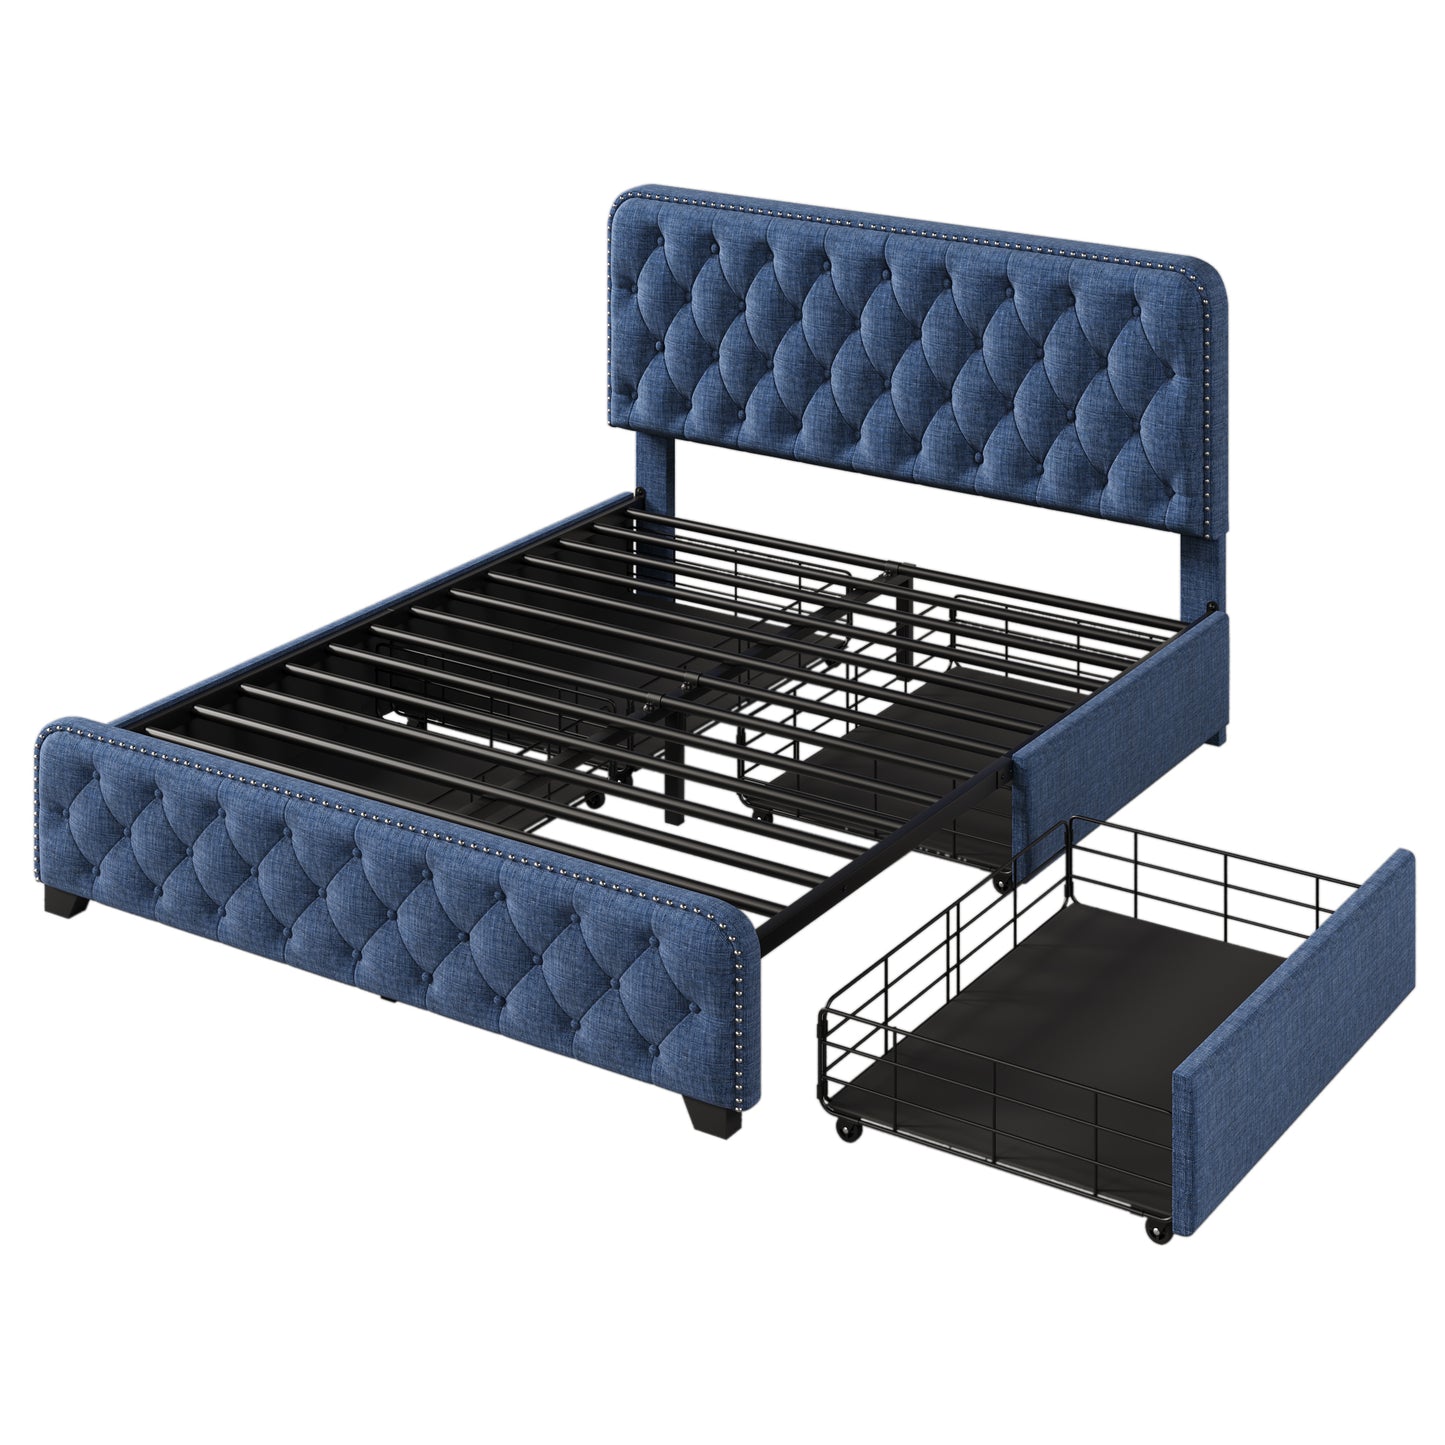 Upholstered Platform Bed Frame with Four Drawers, Button Tufted Headboard and Footboard Sturdy Metal Support, No Box Spring Required, Blue, Queen